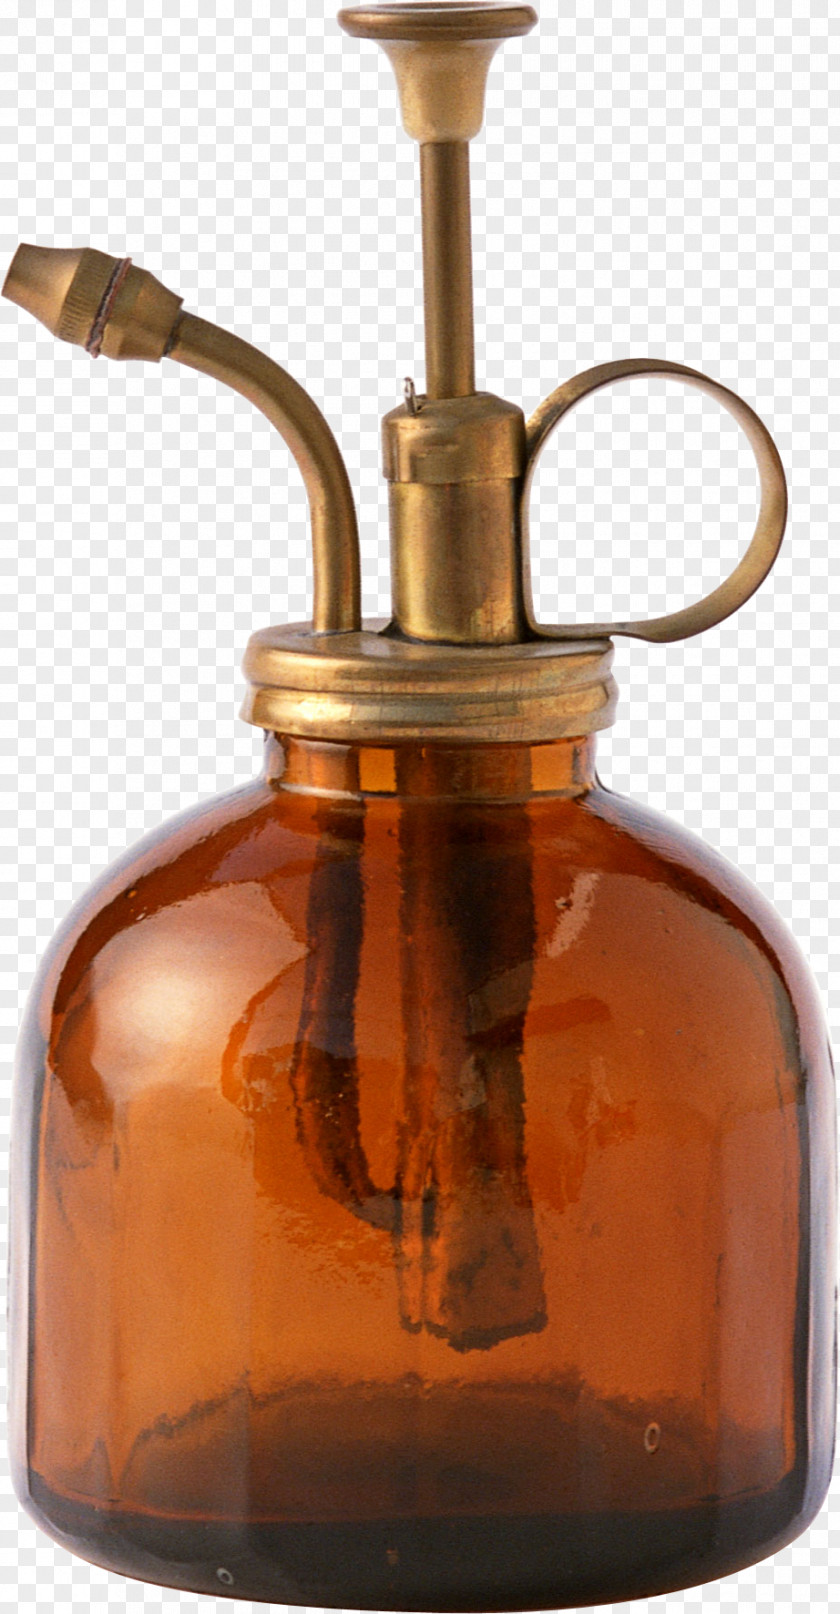 Specimen Watering Cans Bottle Glass PNG